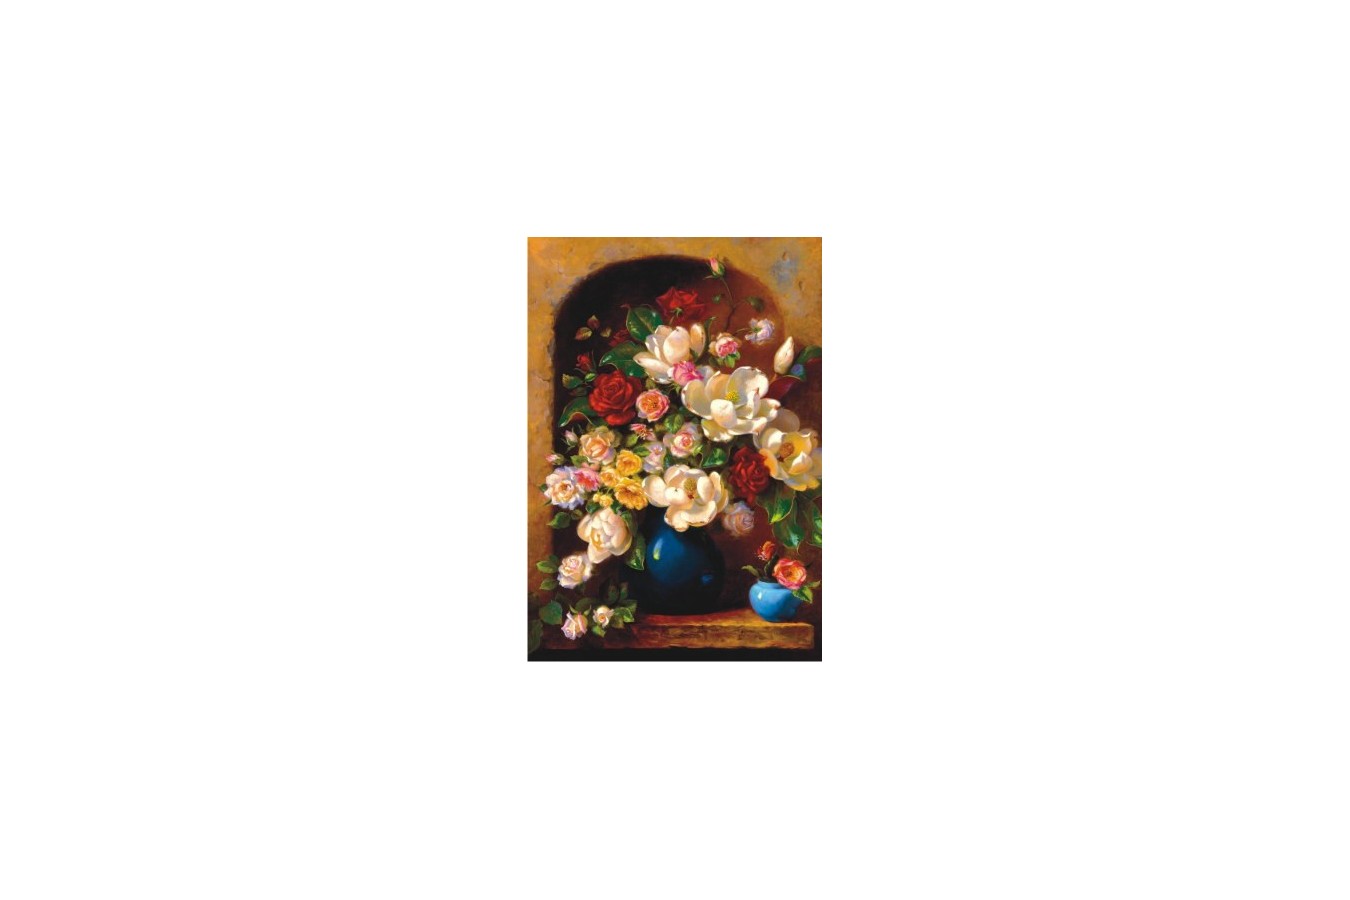 Puzzle Anatolian - Flowers in a Vase, 500 piese (3558)